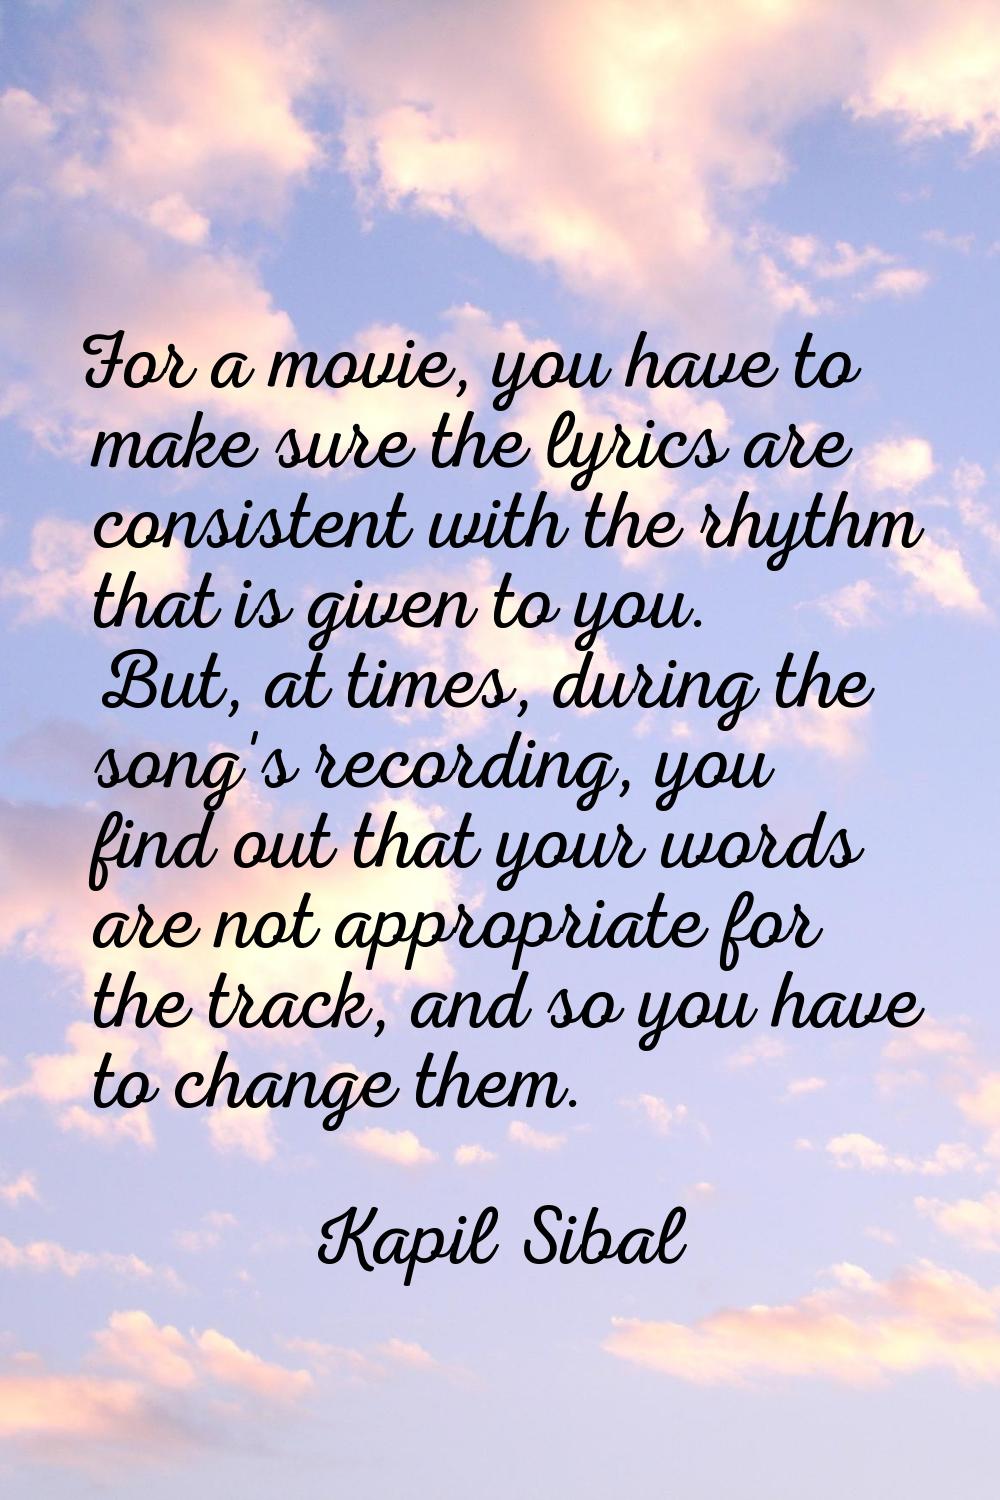 For a movie, you have to make sure the lyrics are consistent with the rhythm that is given to you. 